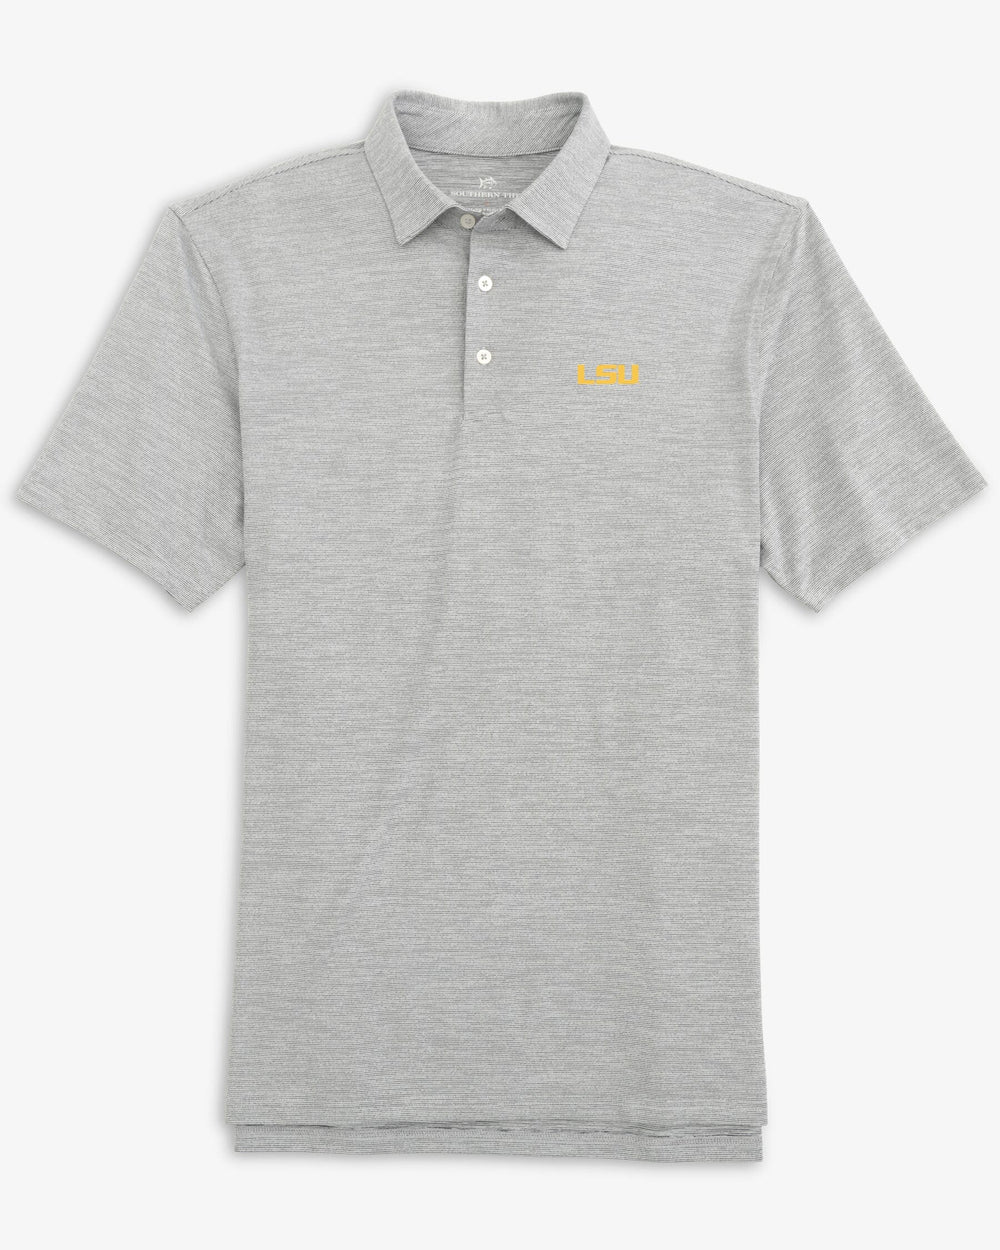 The front view of the LSU Tigers Driver Spacedye Polo Shirt by Southern Tide - Black